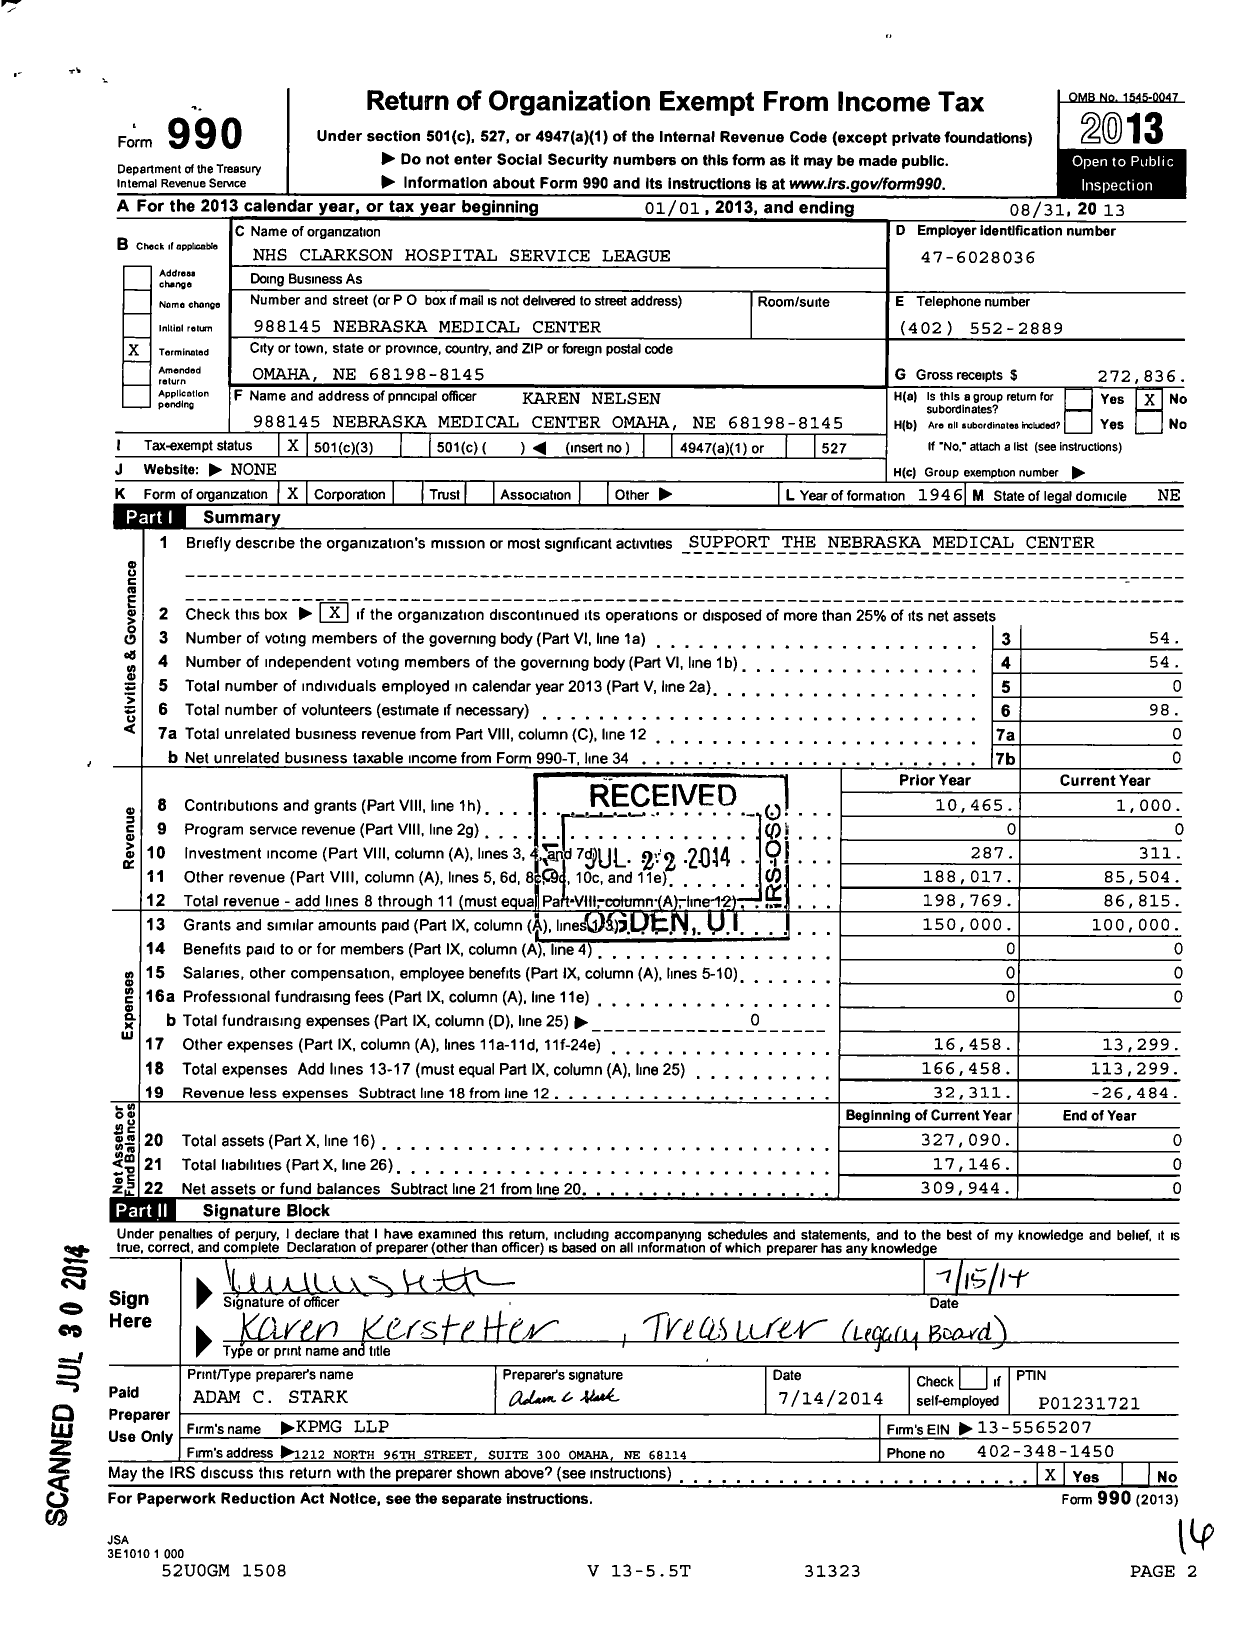 Image of first page of 2012 Form 990 for NHS Clarkson Hospital Services League